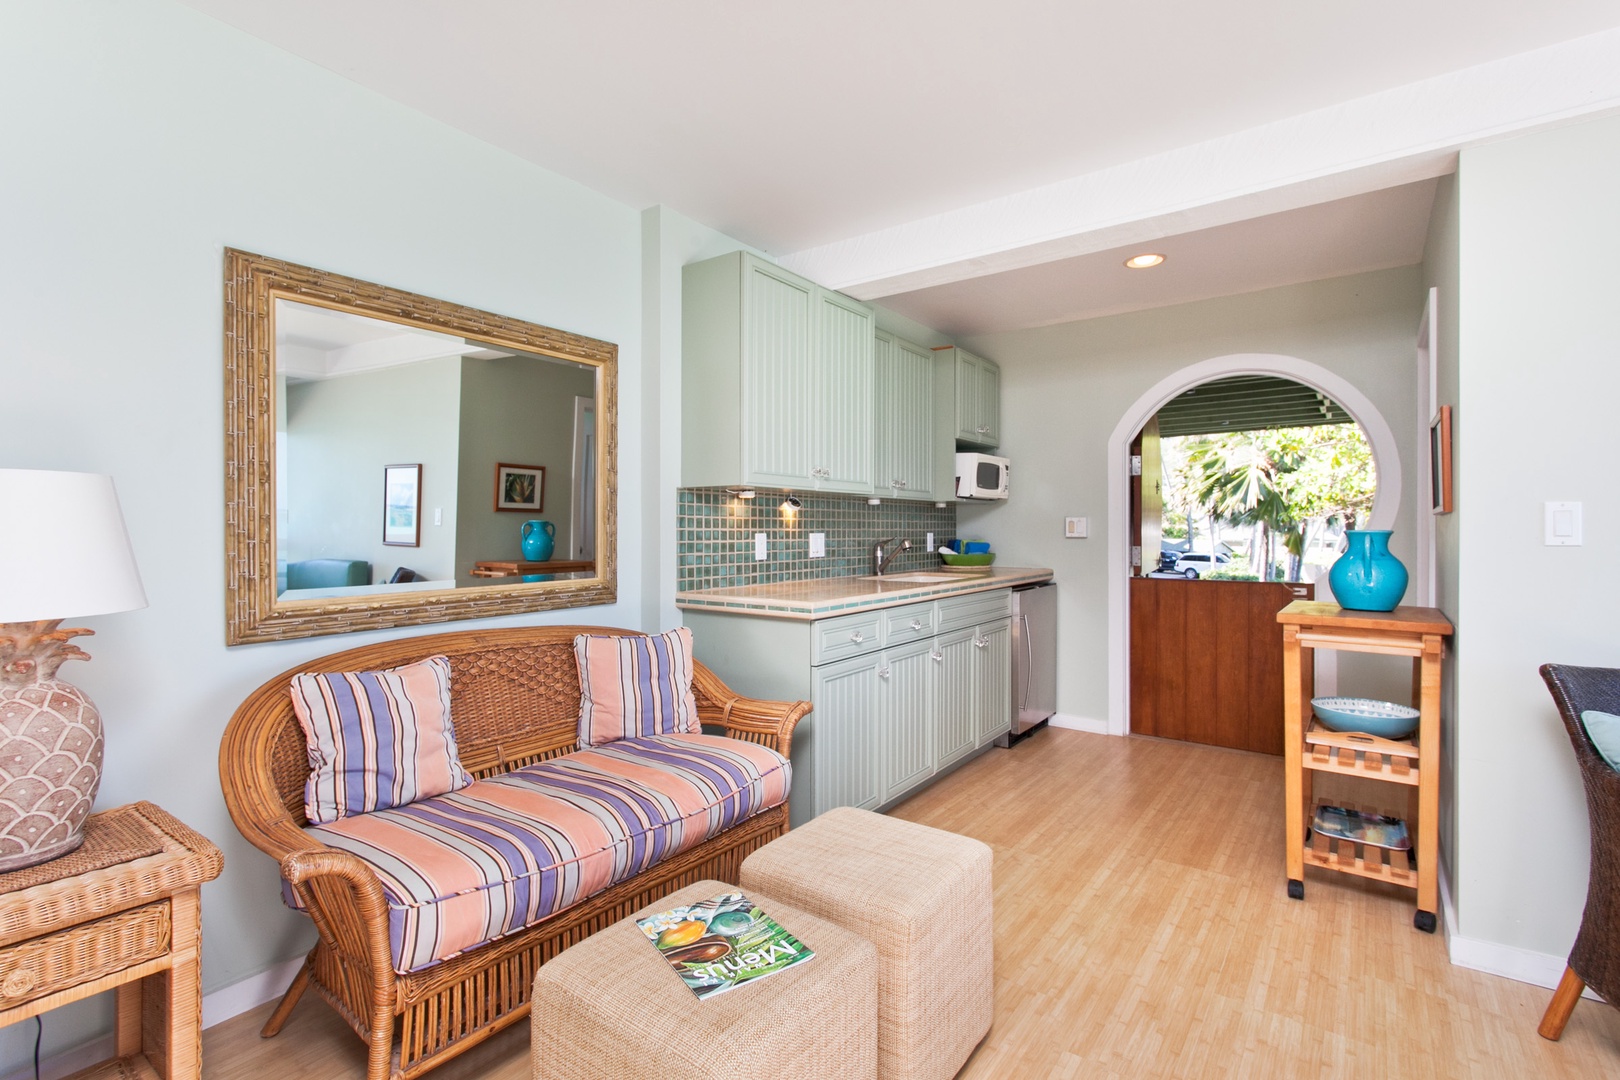 Kailua Vacation Rentals, Hale Kainalu* - The lower-level studio adds flexibility to your accommodation.